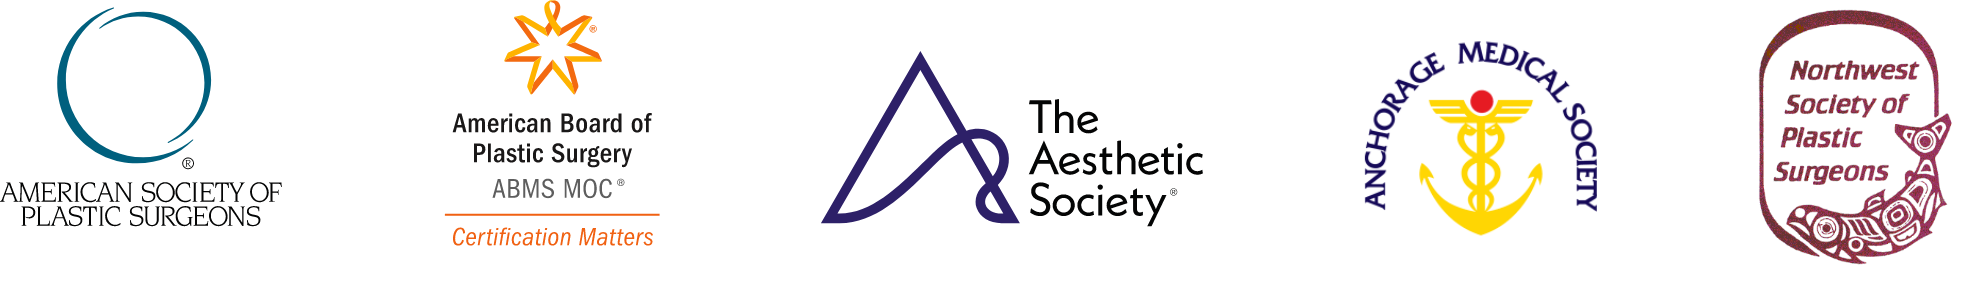 Credentials logos, ASPS, ABPS, The Aesthetic Society, Anchorage Medical Society, NSPS